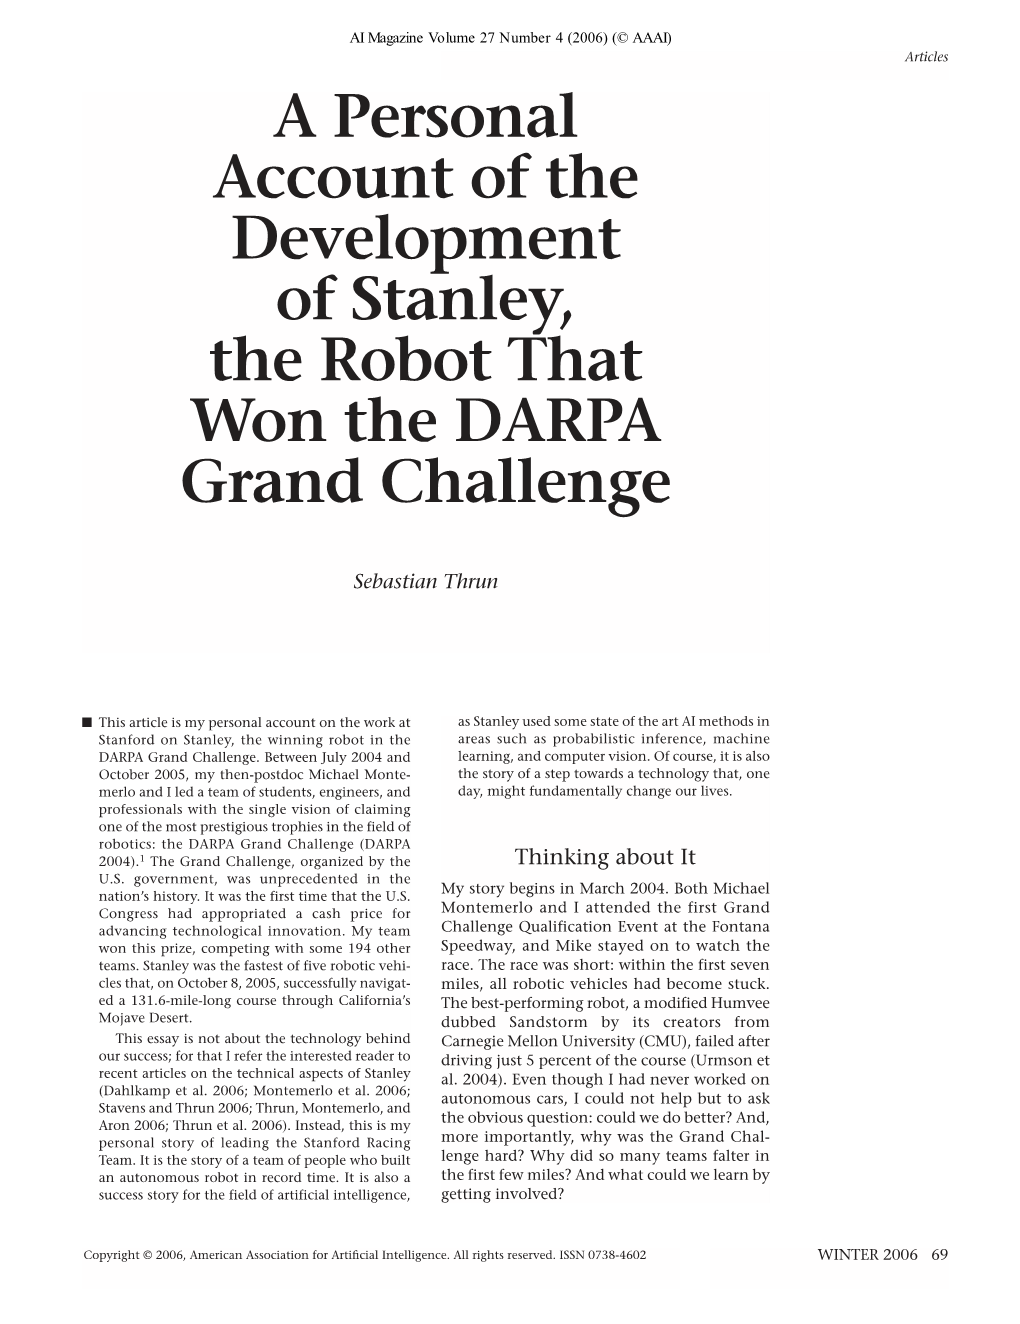 A Personal Account on the Development of Stanley, the Robot